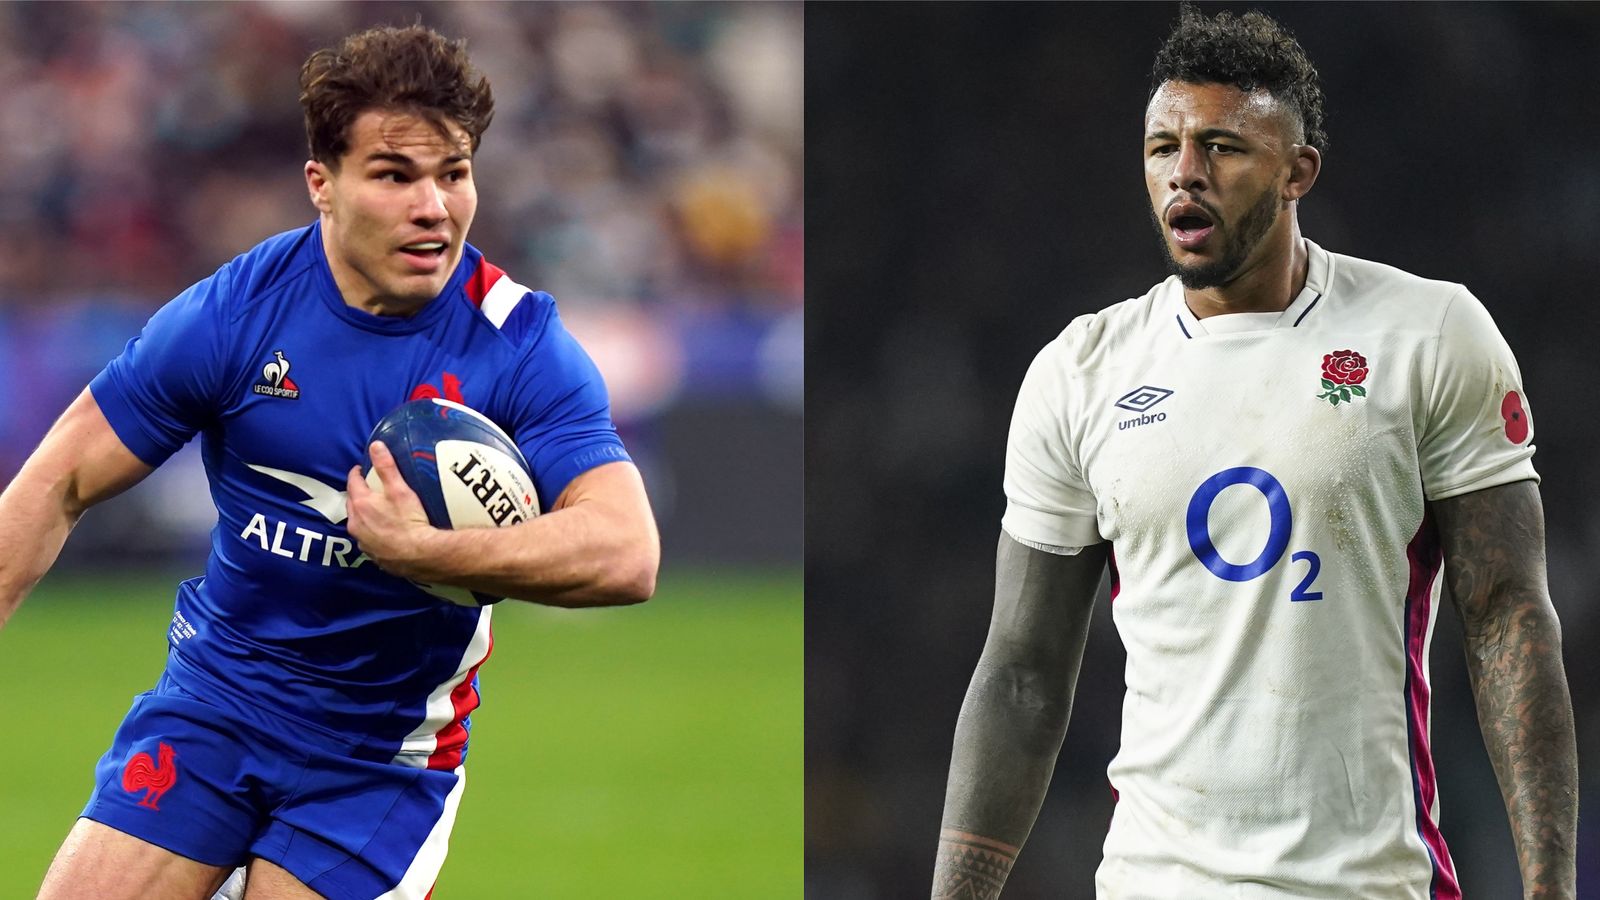 Six Nations 2022: France vs England talking points preview ahead of kick-off at Stade de France